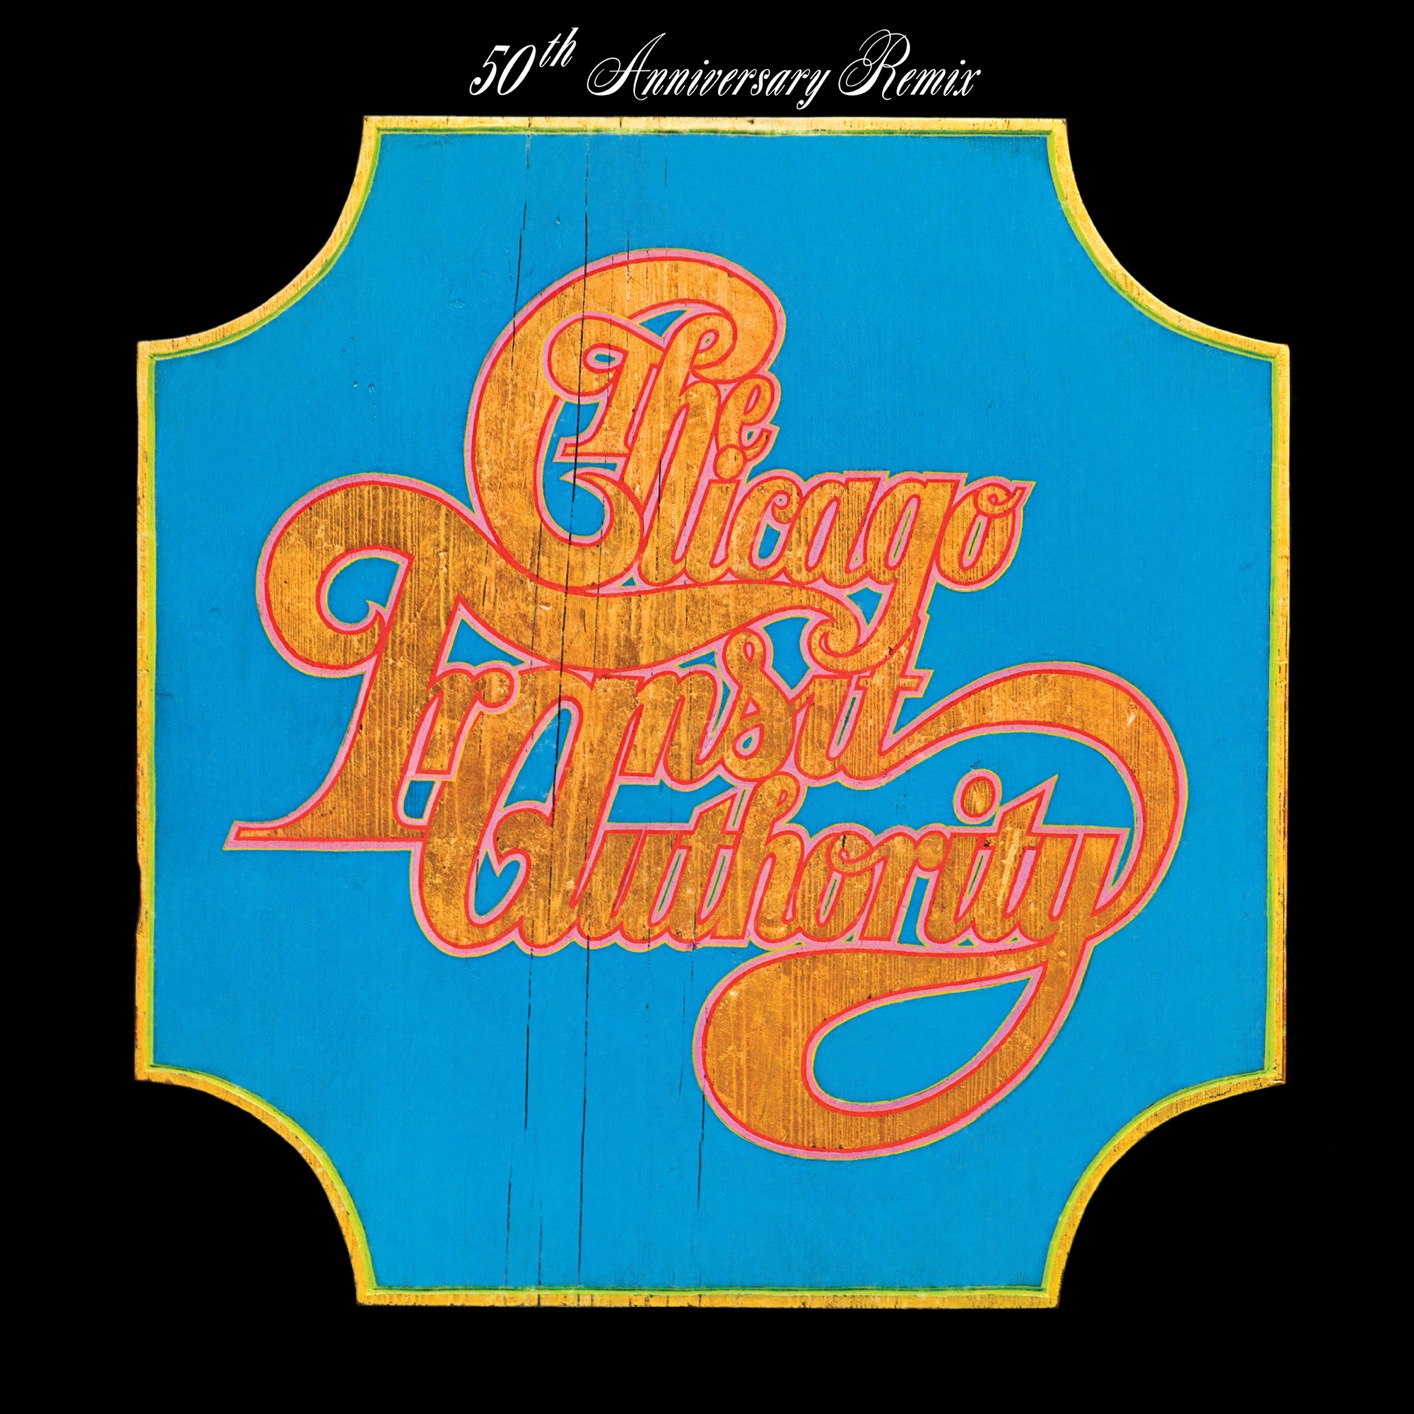 Chicago – Chicago Transit Authority (50th Anniversary Remix) (1969/2019) [Official Digital Download 24bit/192kHz]